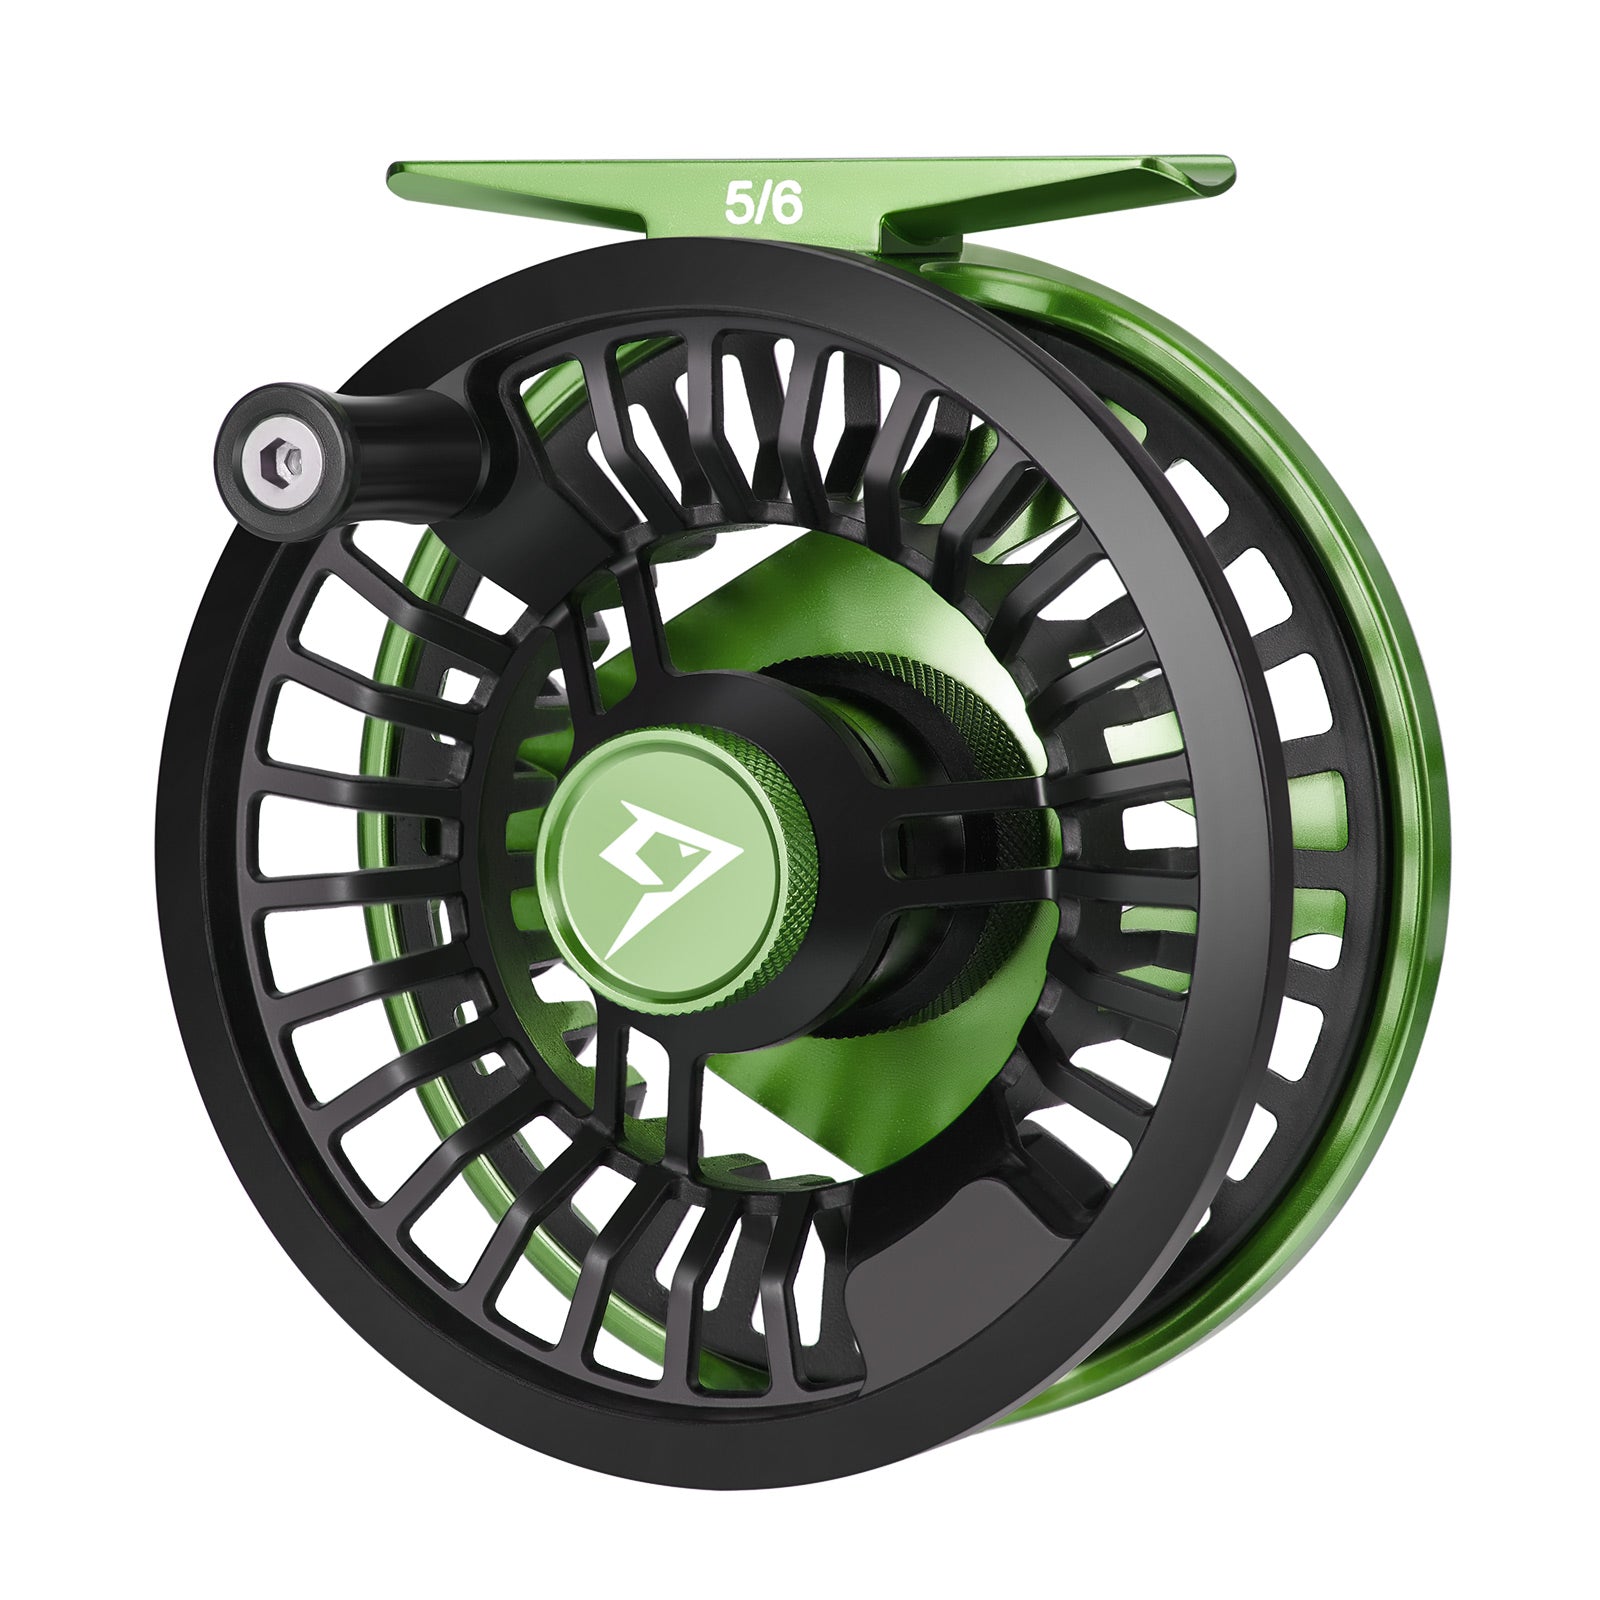 Piscifun® Aoka XS Fly Fishing Reel with Sealed Drag, CNC-machined Aluminum  Alloy Body Fly Reel, Black & Fruitgreen / 3/4WT